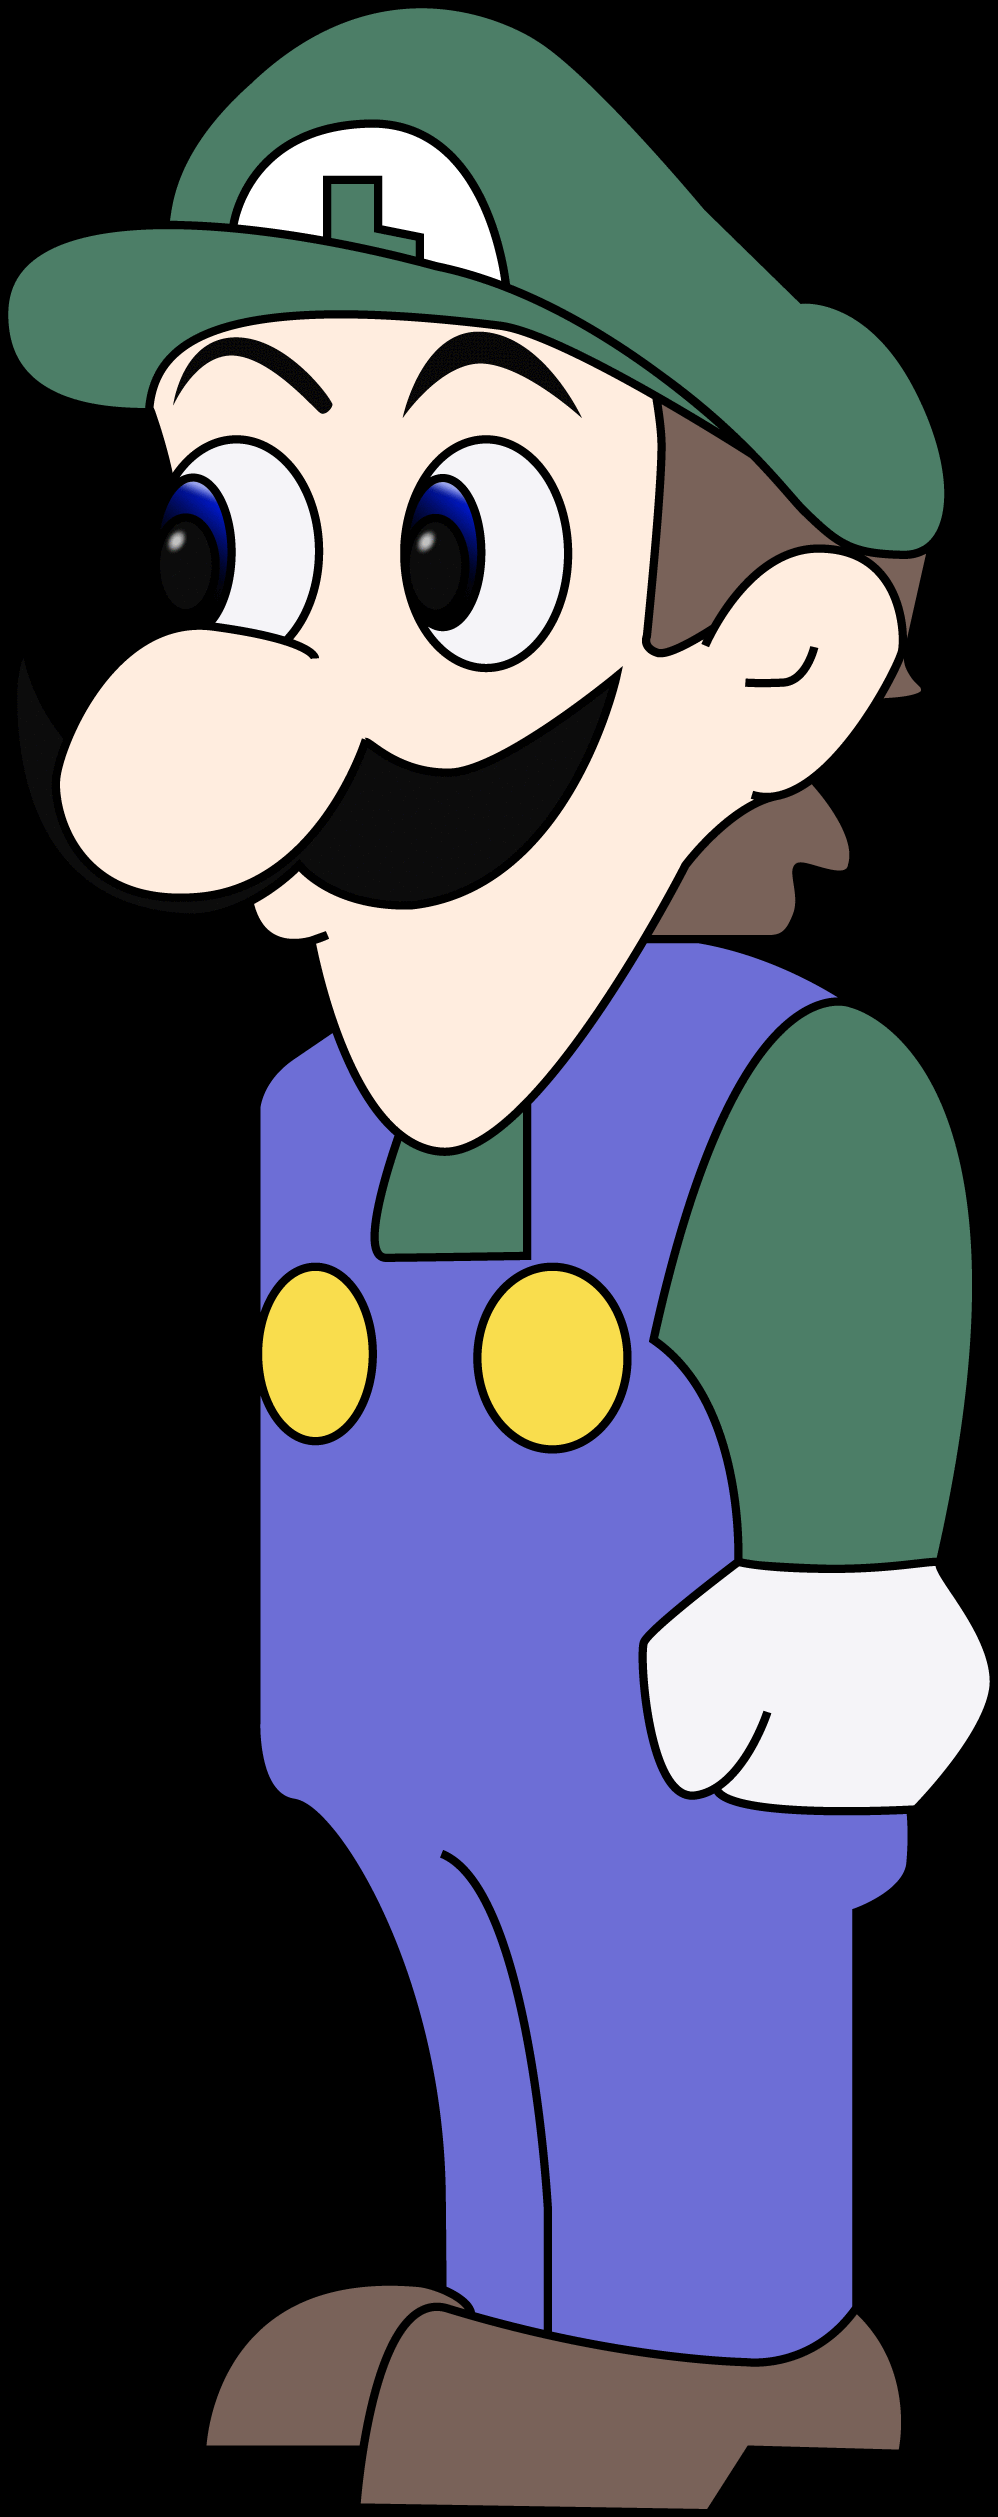 https://cdn.lowgif.com/small/a2a6d40cc32ece2f-image-result-for-weegee-meme-mlg-pinterest-weegee-meme-and-humour.gif